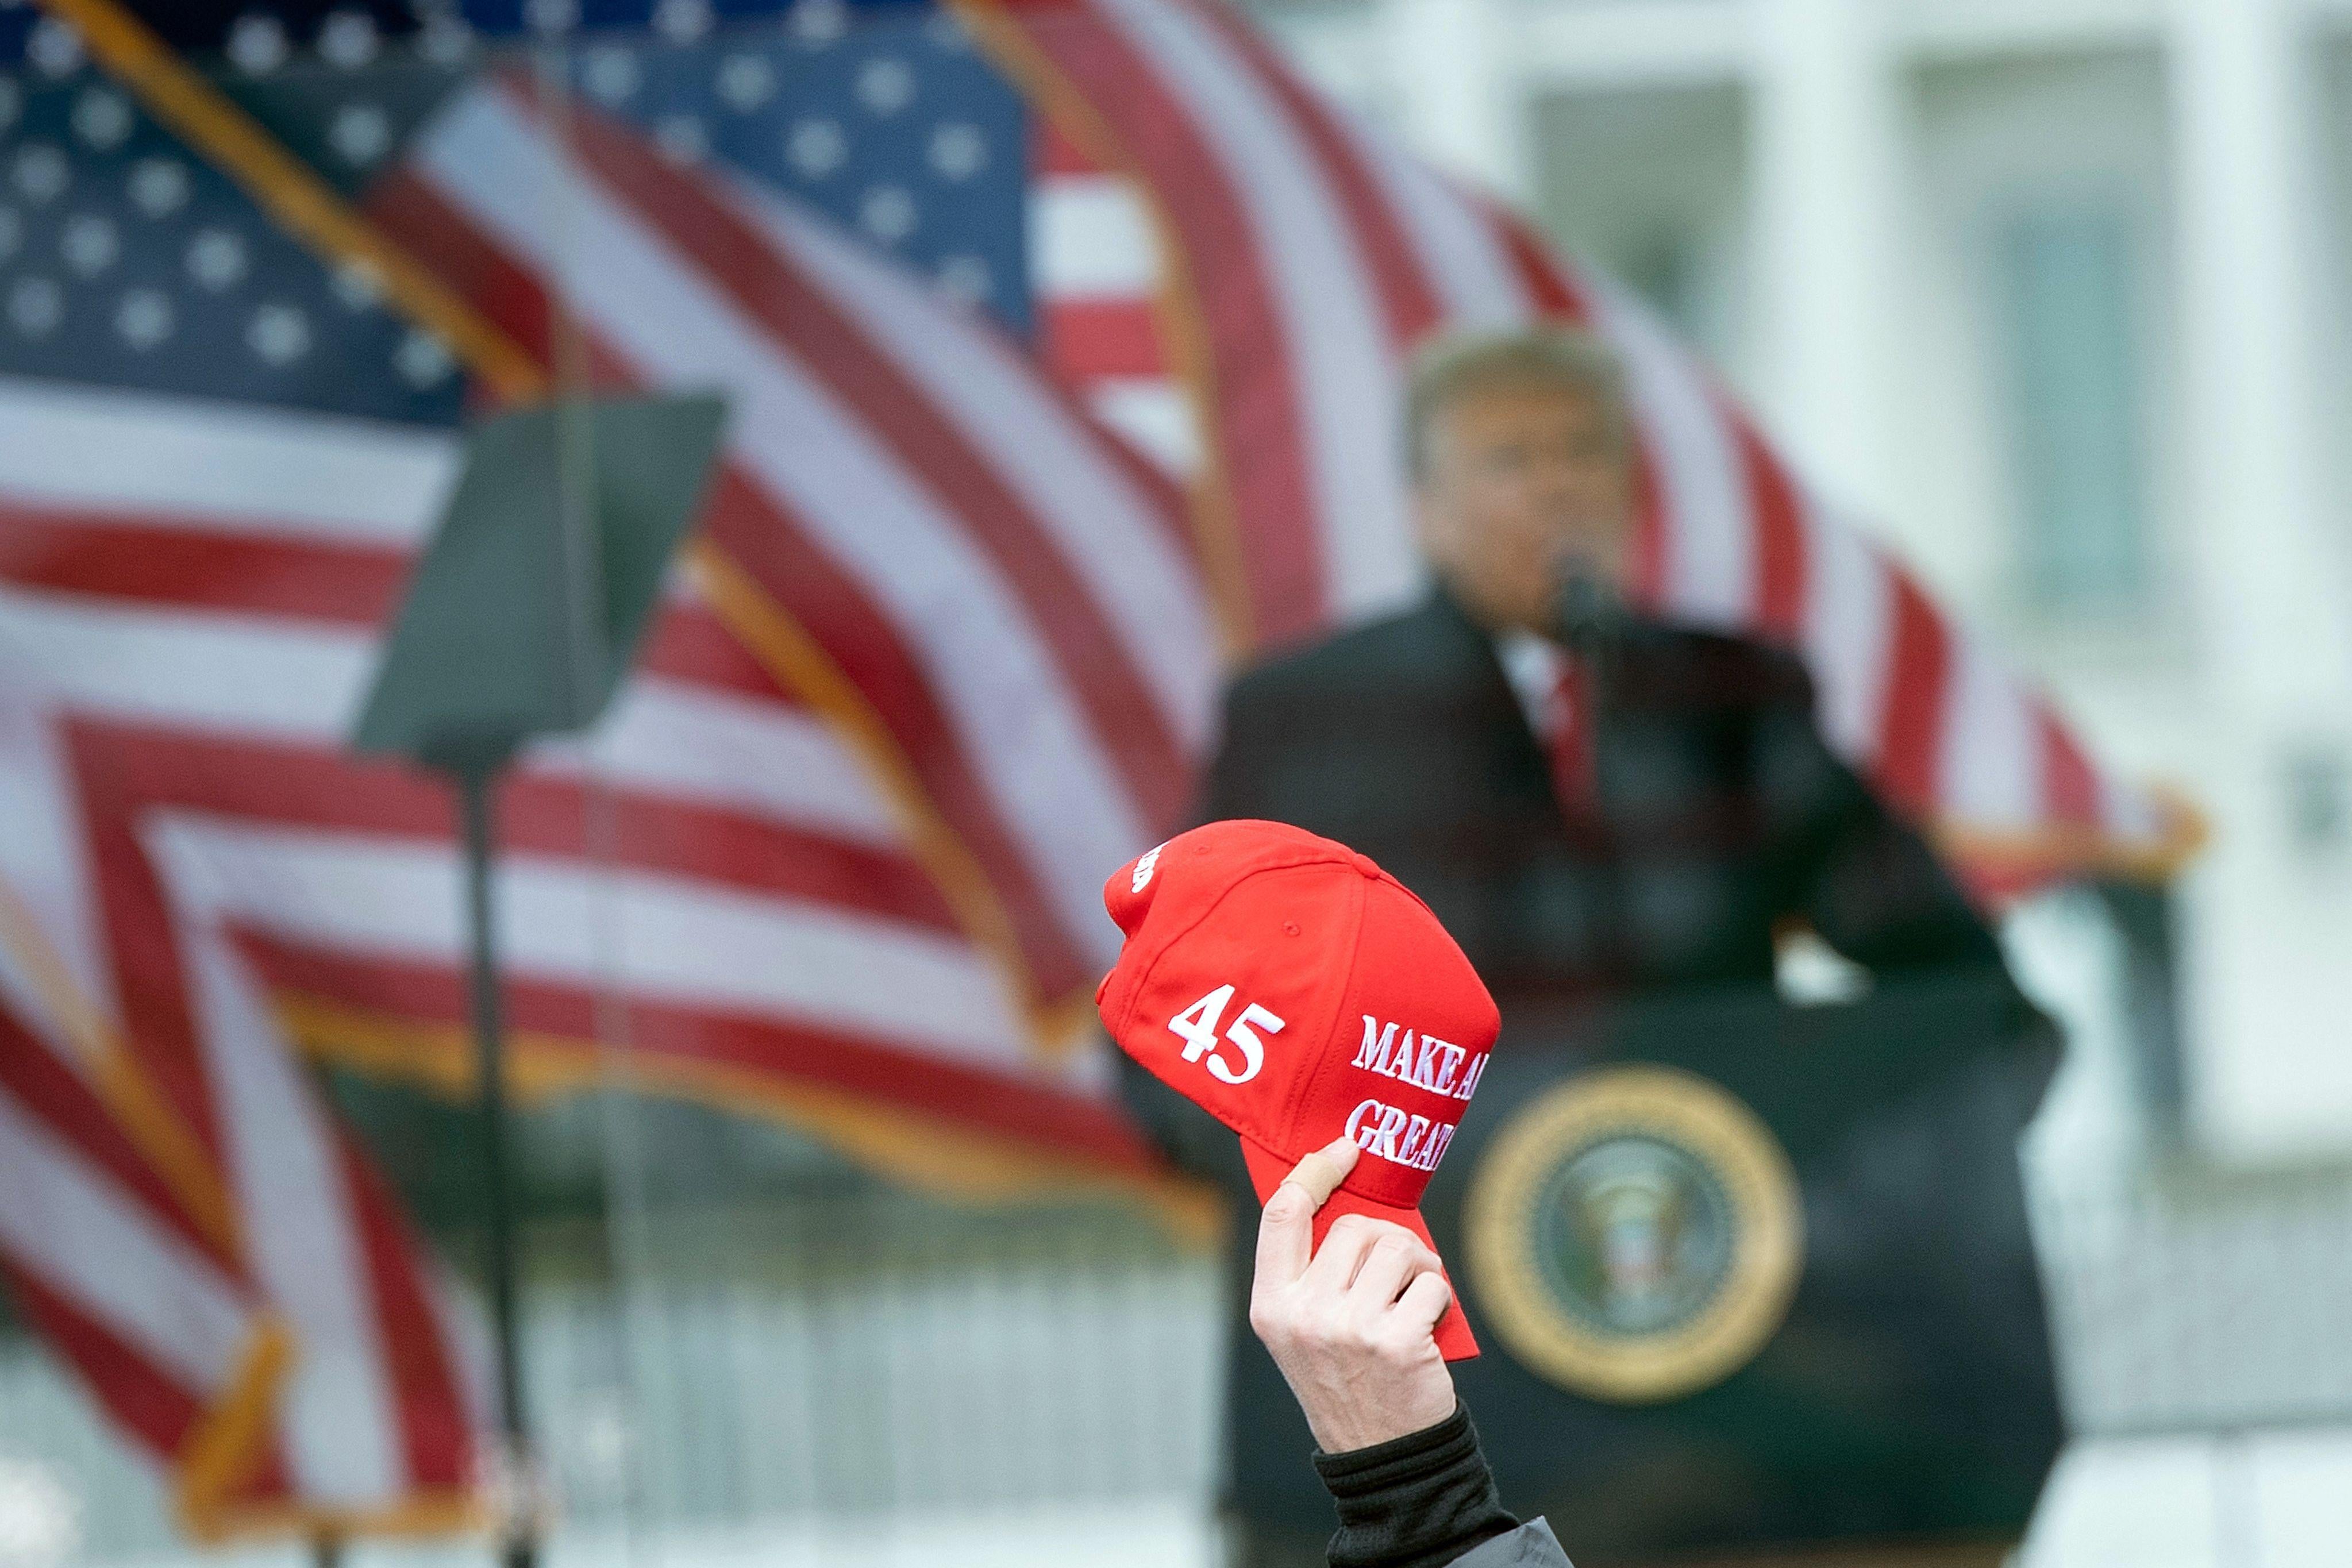 Trump standing at a lectern beside American flags out of focus in the background and a hand holding up a red MAGA hat in focus in the foreground